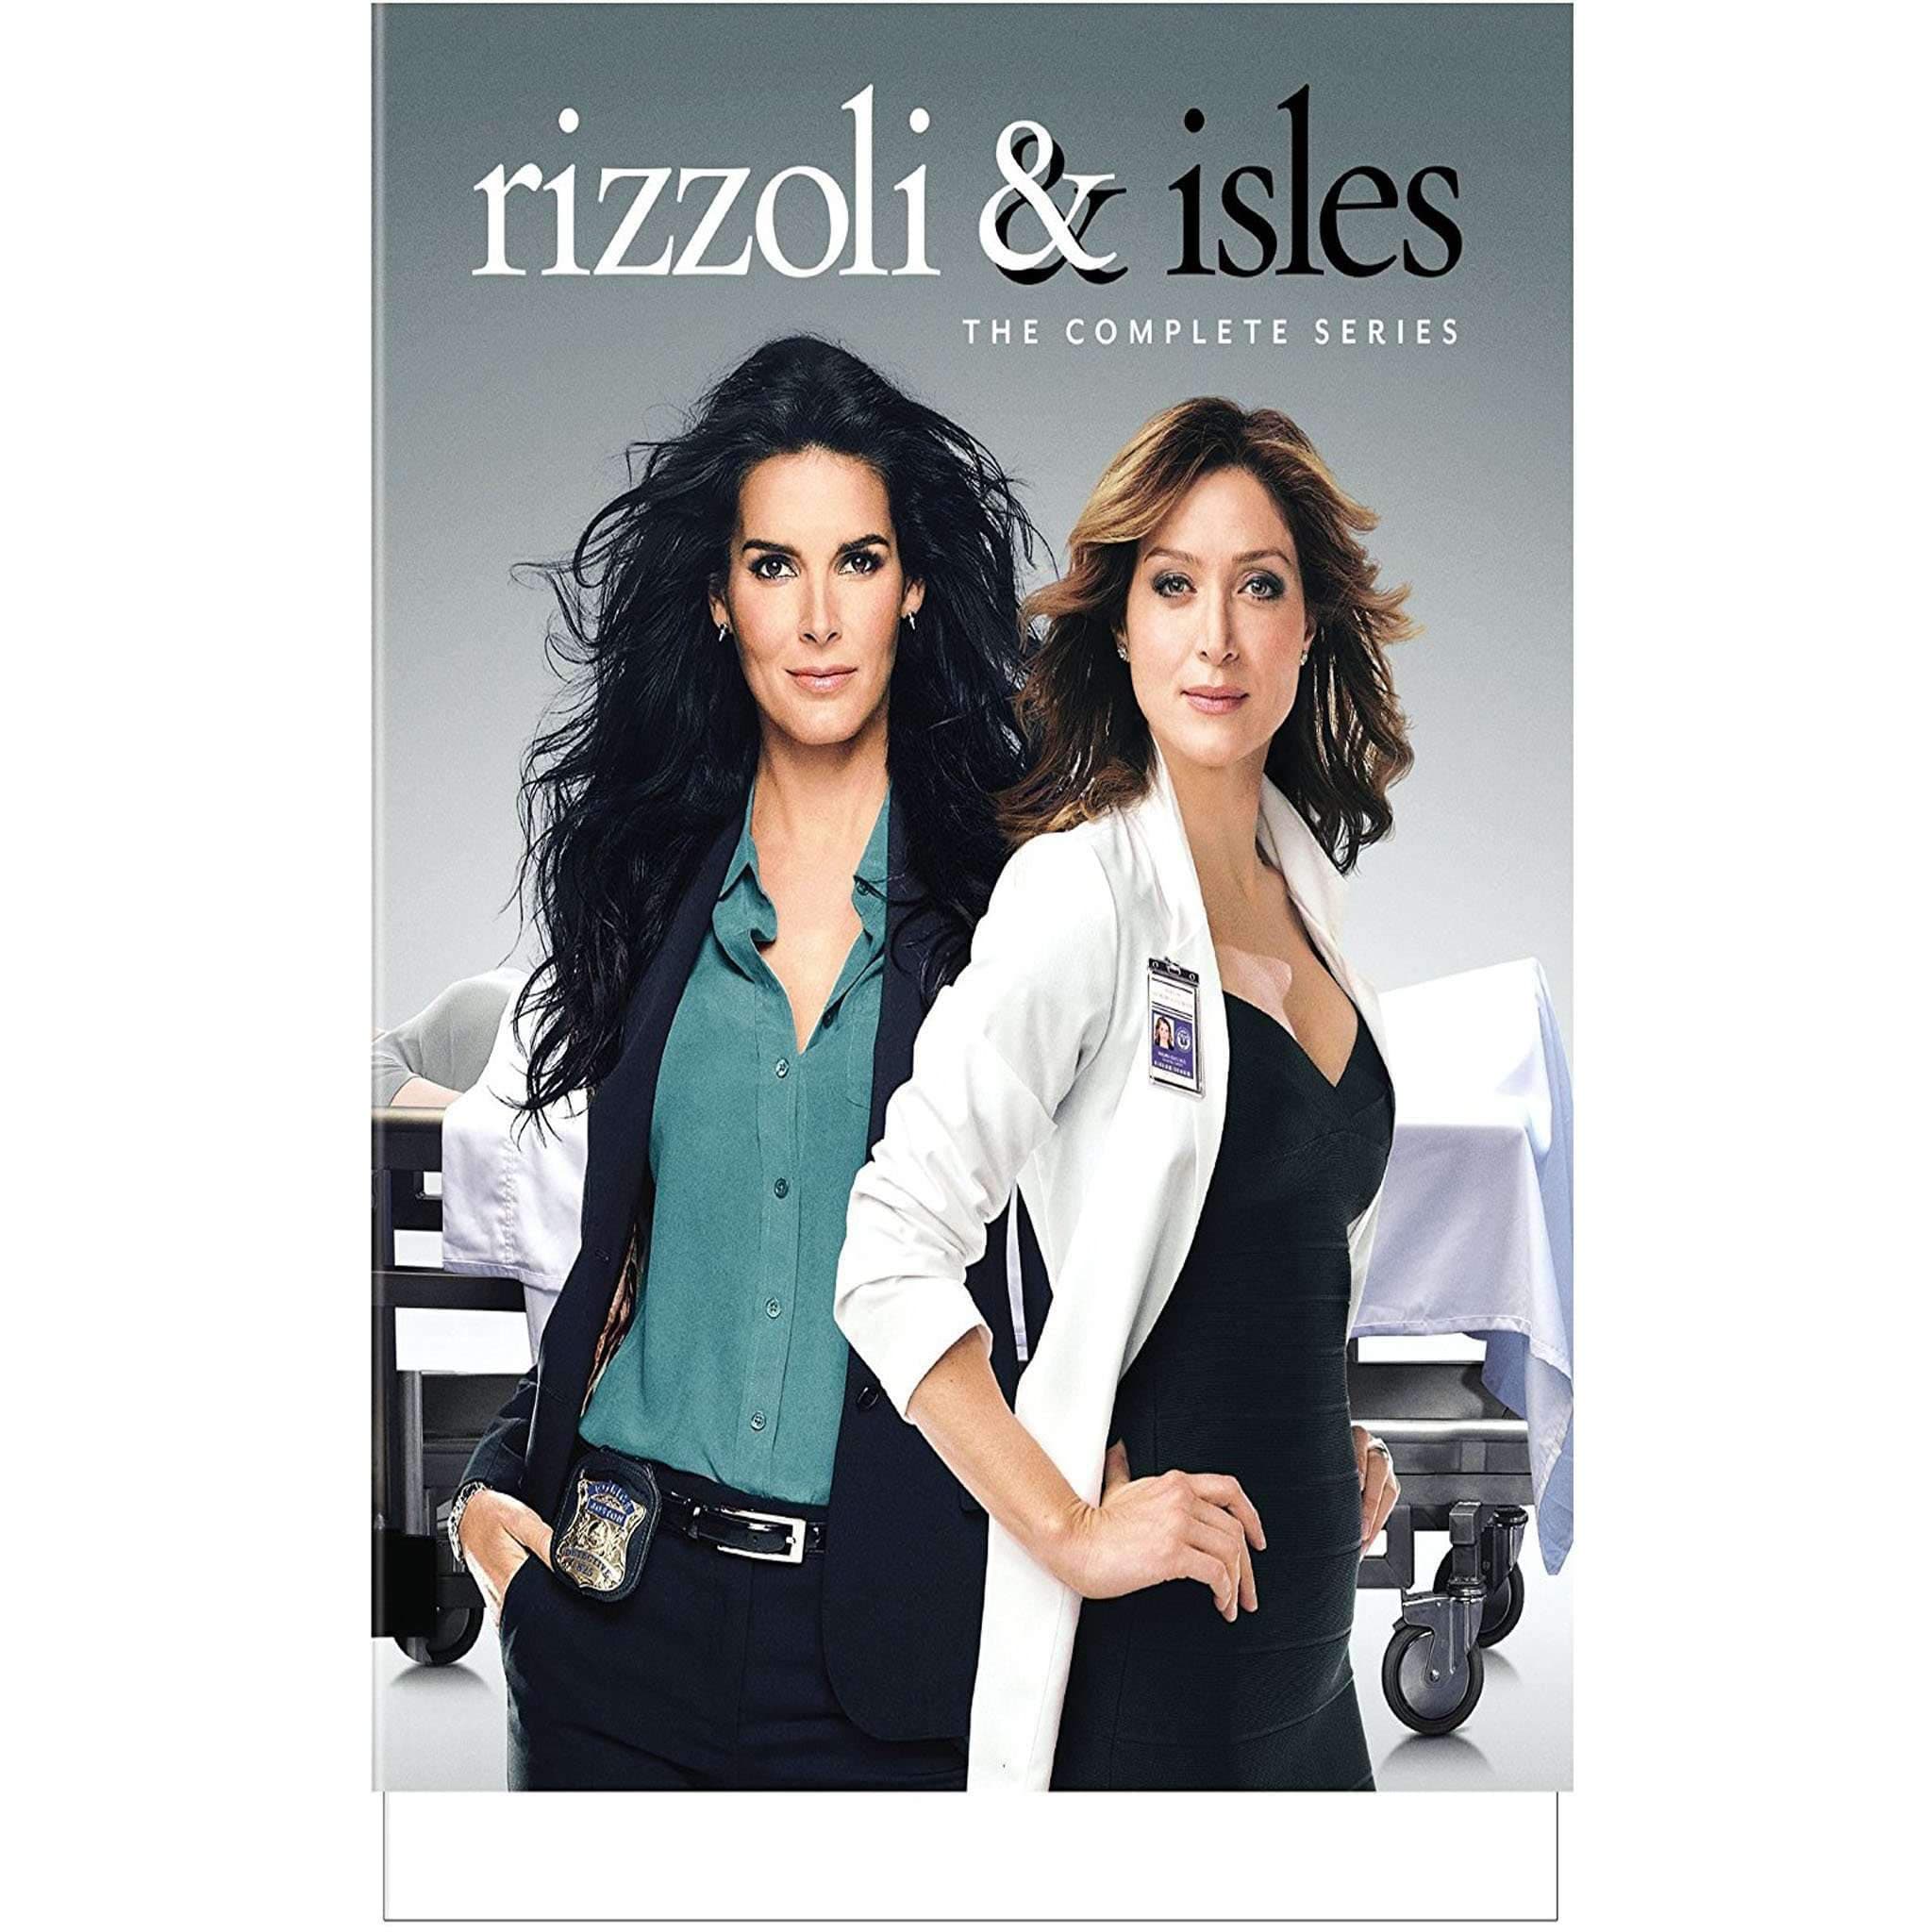 Rizzoli & Isles DVD Complete Series Box Set Warner Home Videos DVDs & Blu-ray Discs > DVDs > Box Sets